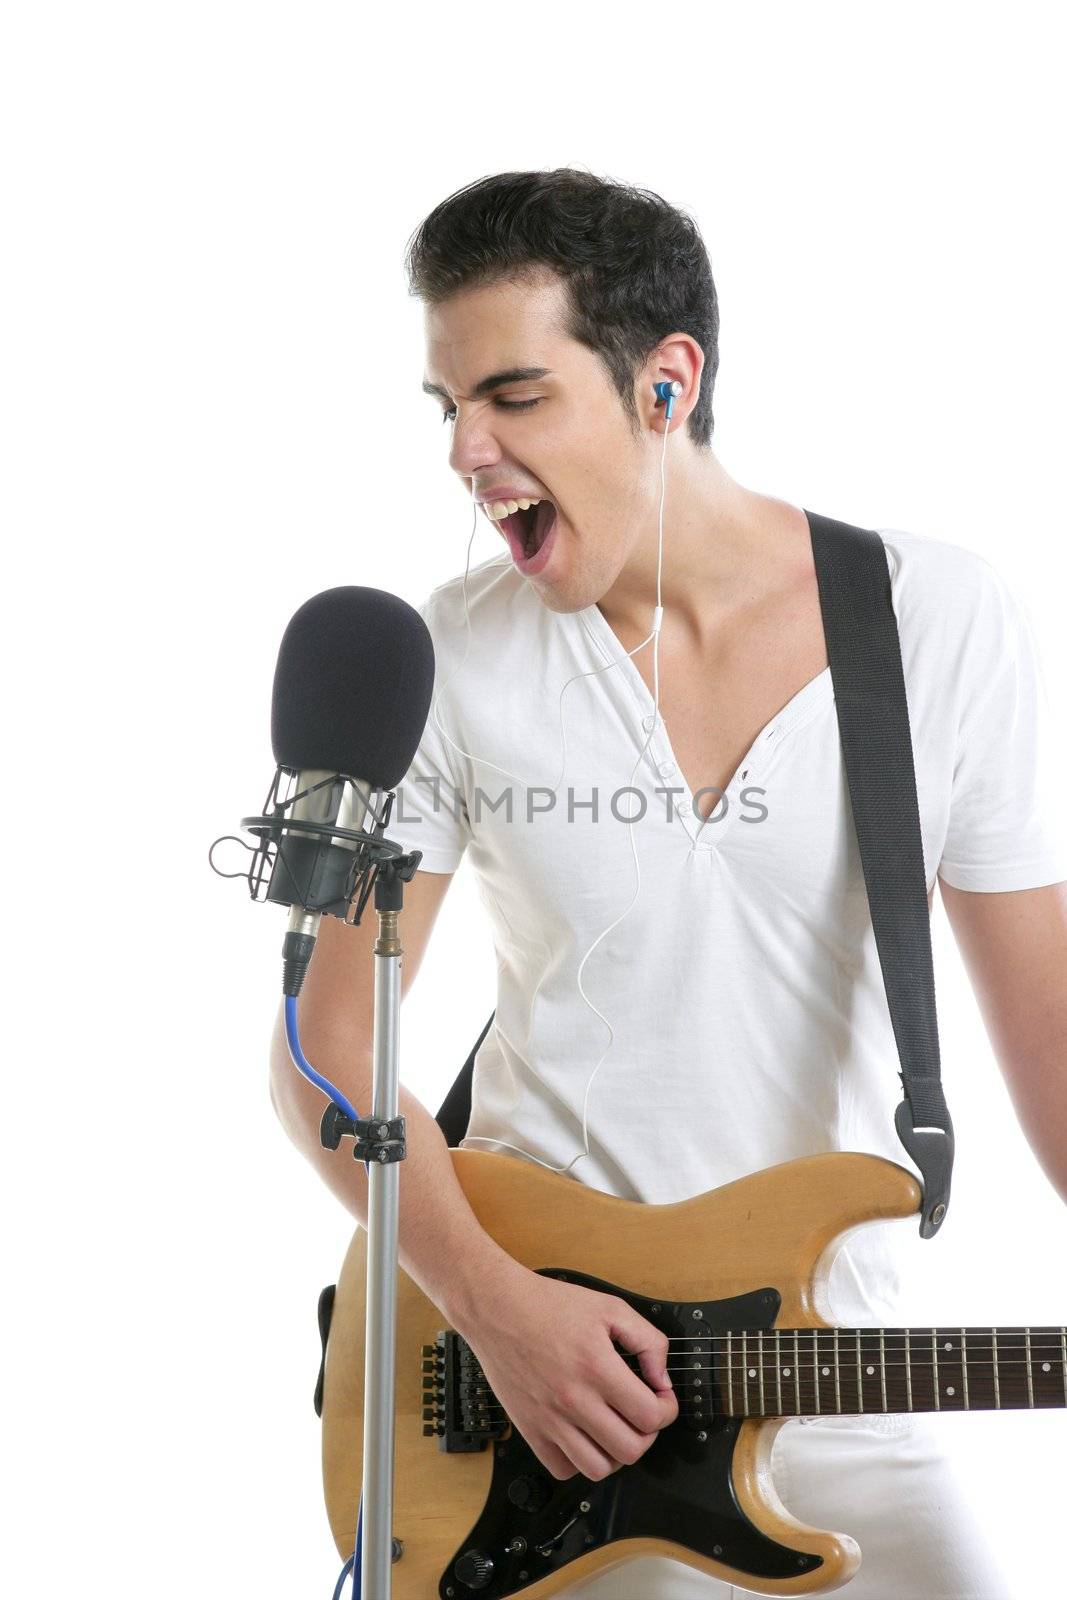 Musician young man playing electric guitar isolated on white